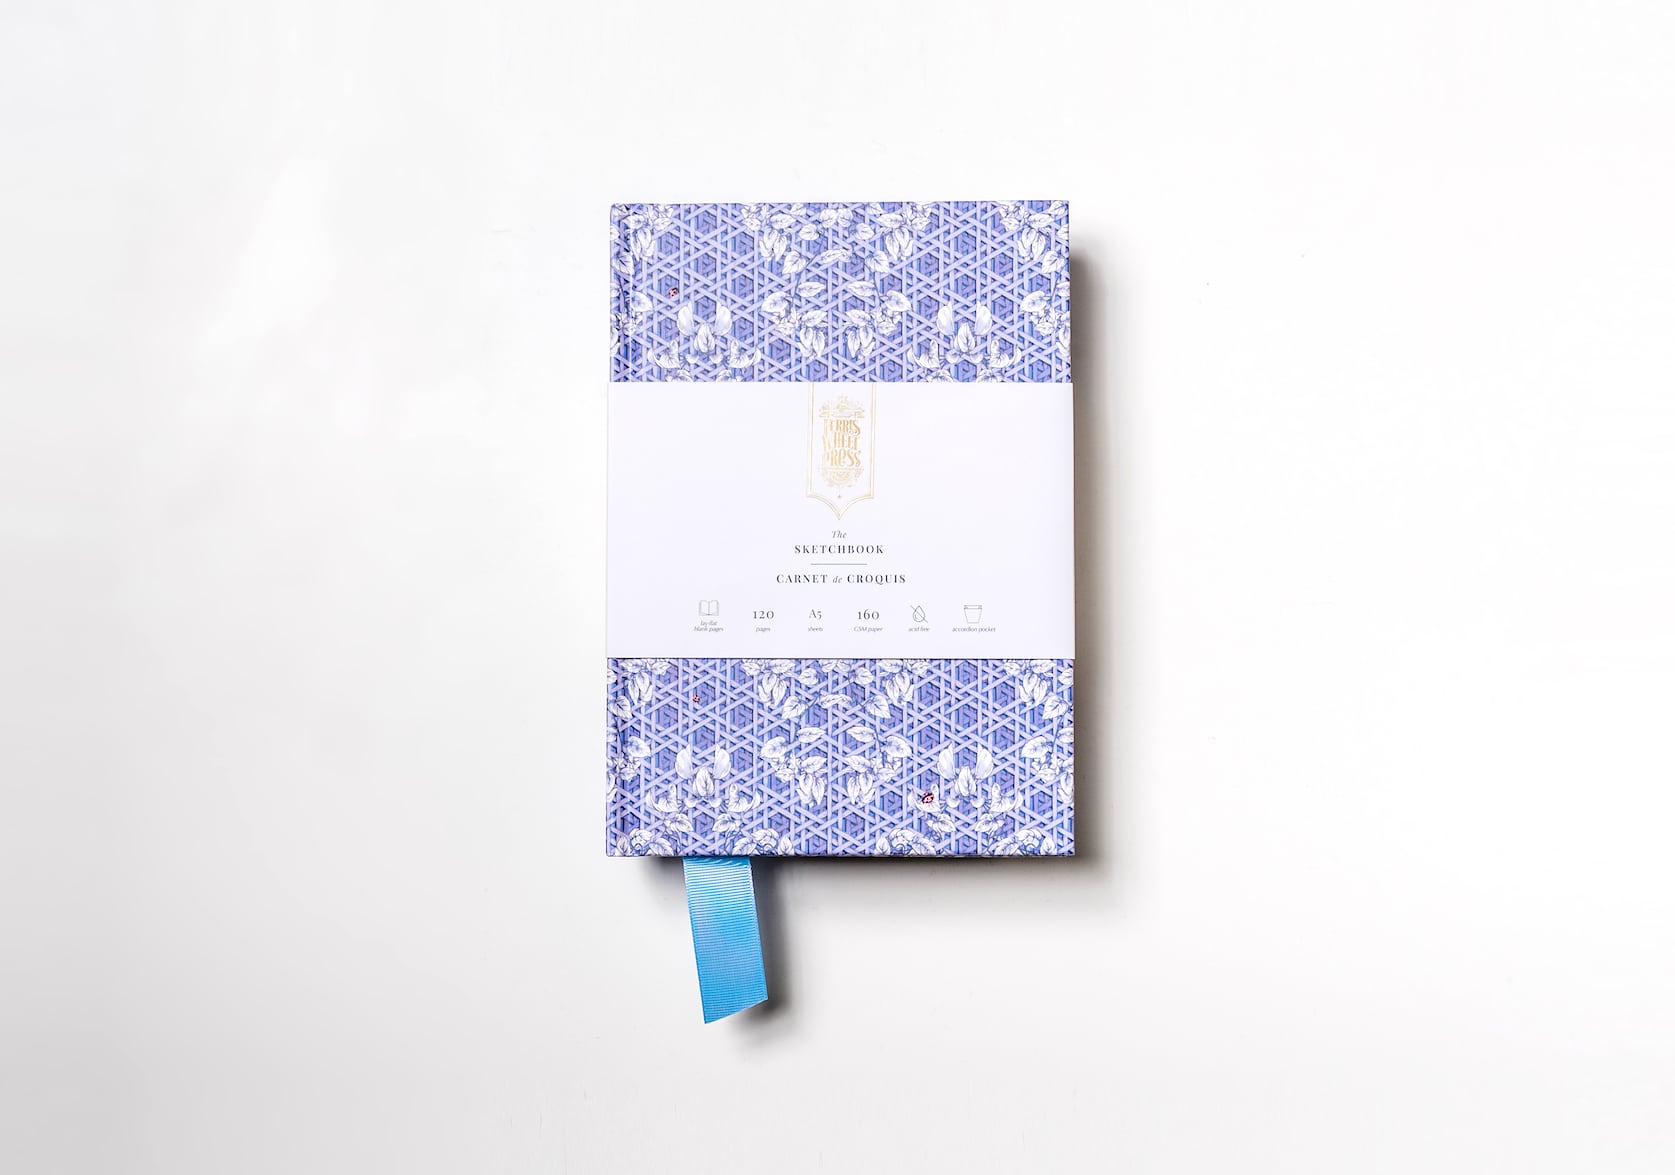 A violet blue sketchbook covered in paper with a hand-illustrated rattan pattern featuring a violet blue fabric ribbon sticking out of the bottom. Gold text on the notebook's packaging reads: Ferris Wheel Press logo. The Sketchbook. Carnet de Croquis.